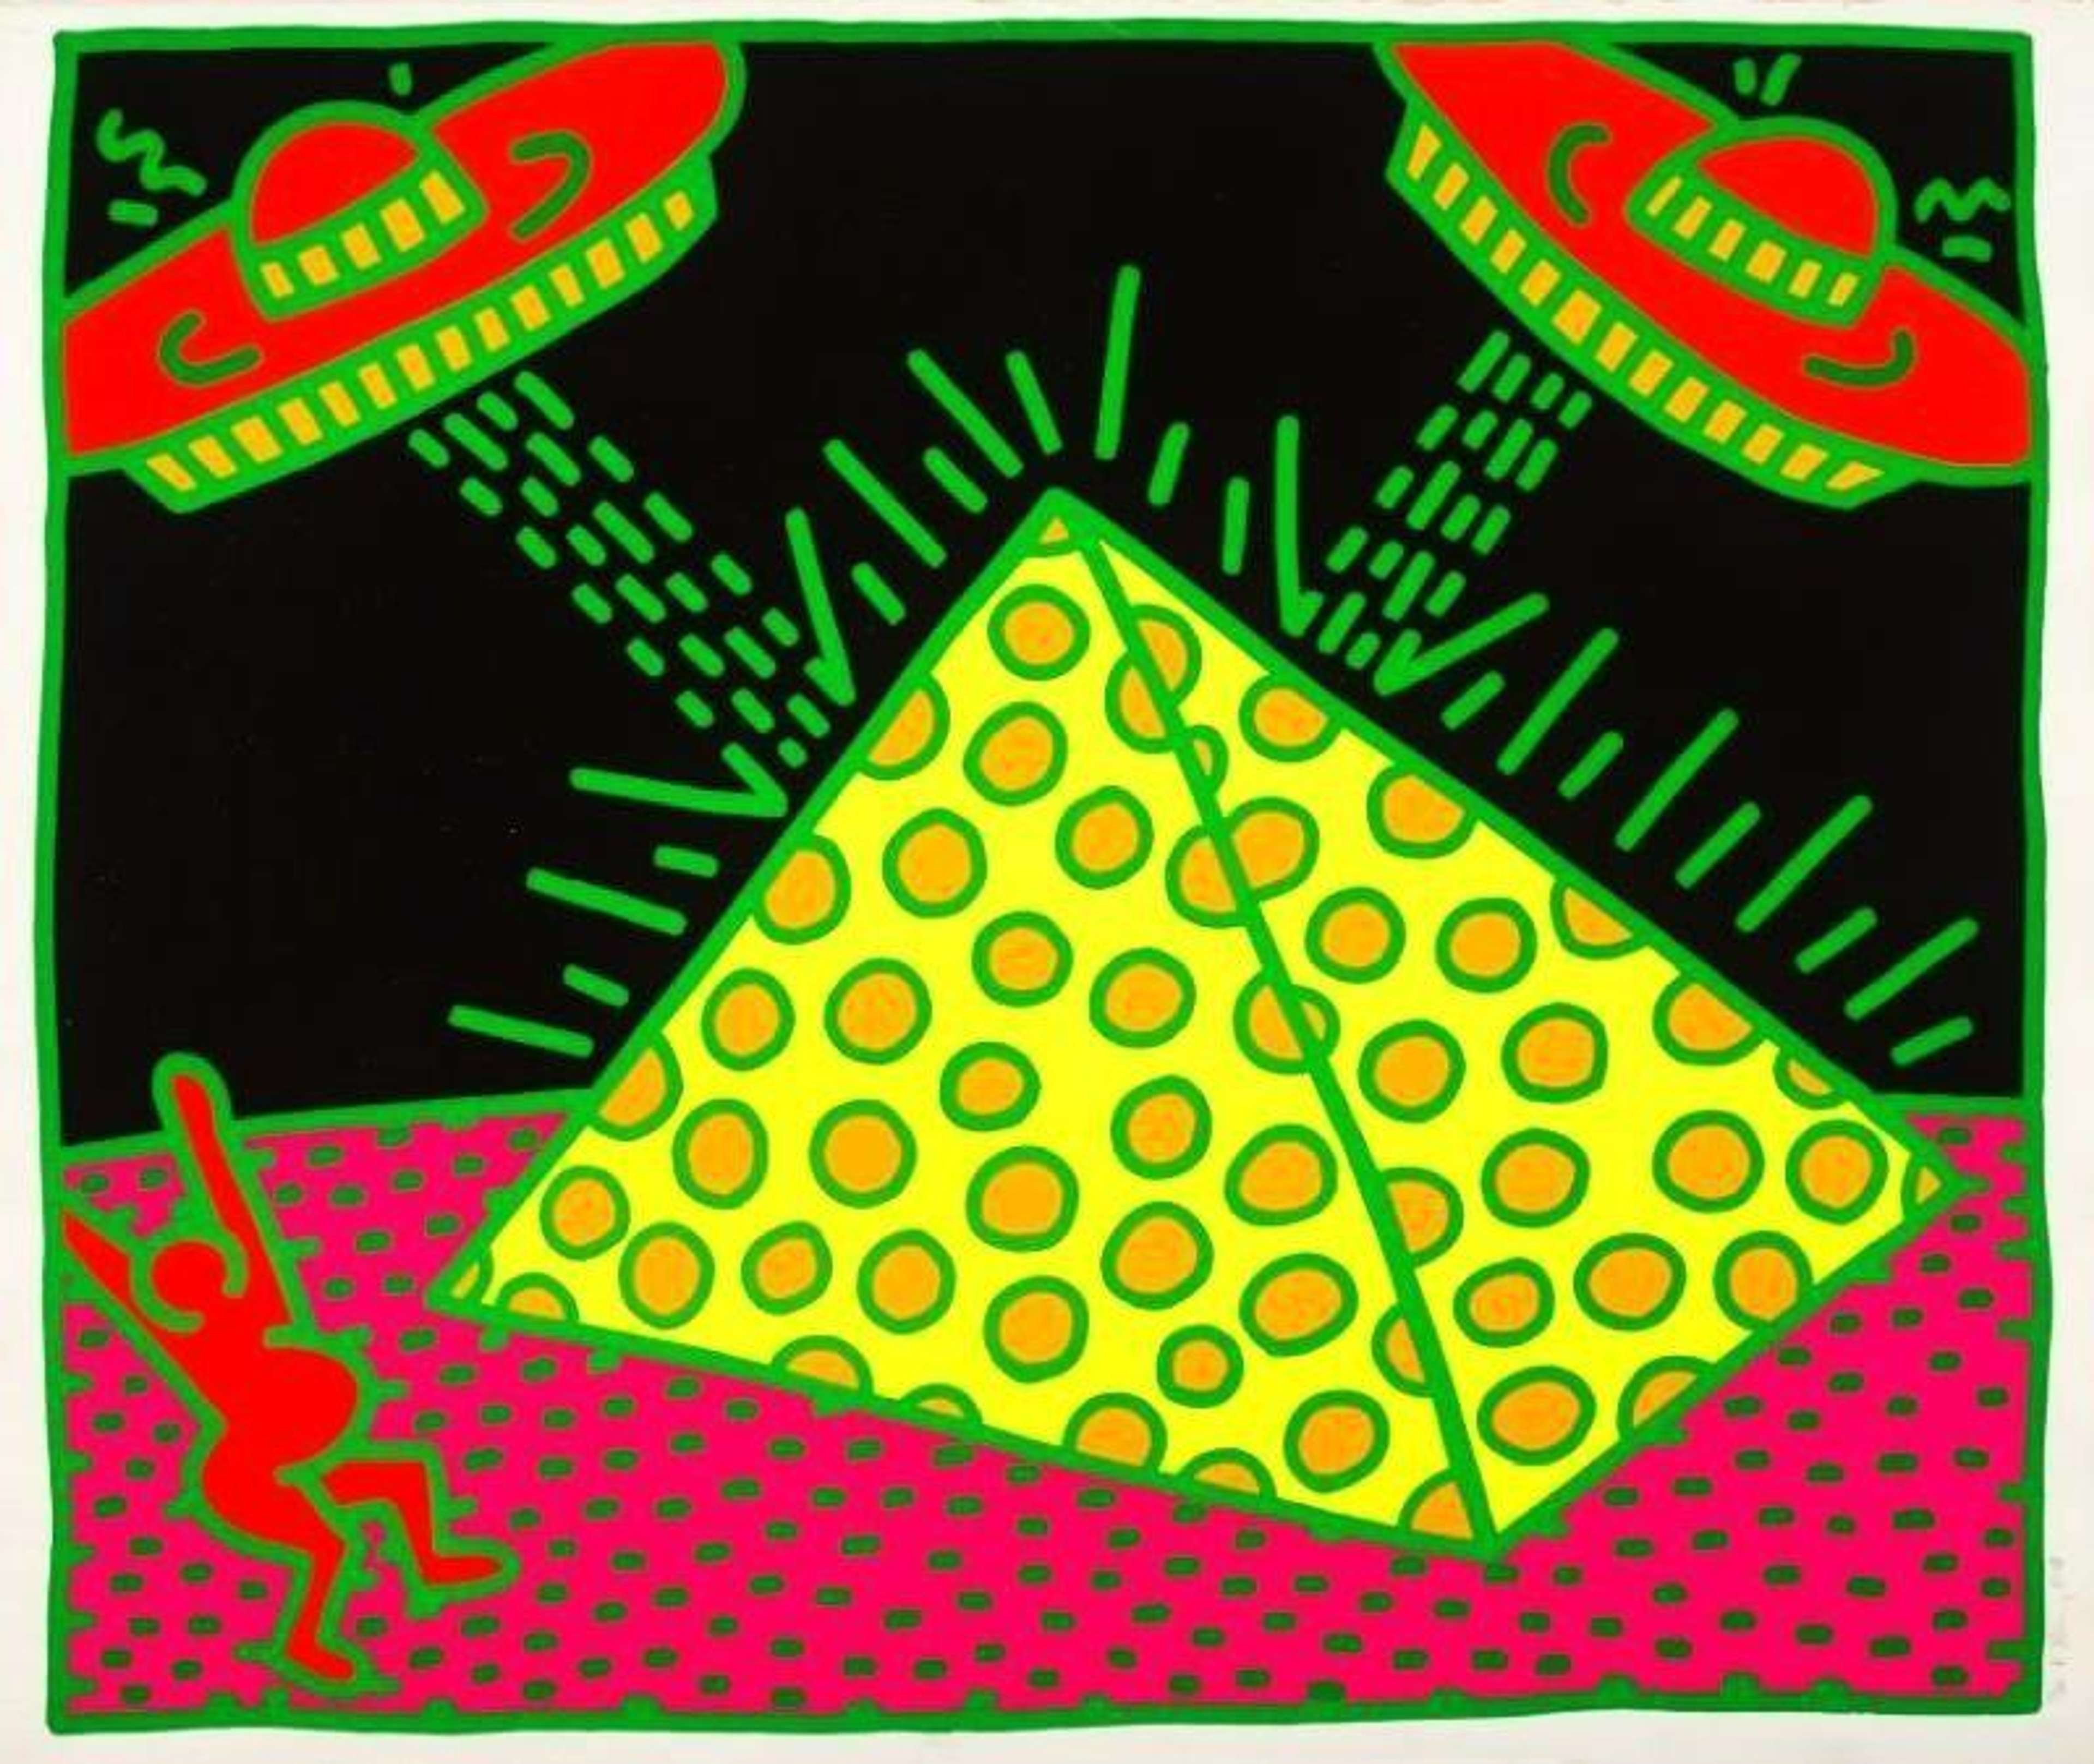 Keith Haring’s Fertility 2. A Pop Art screenprint of a yellow pyramid with orange polka dots with a pregnant figure outside of it and two red UFO above it. 